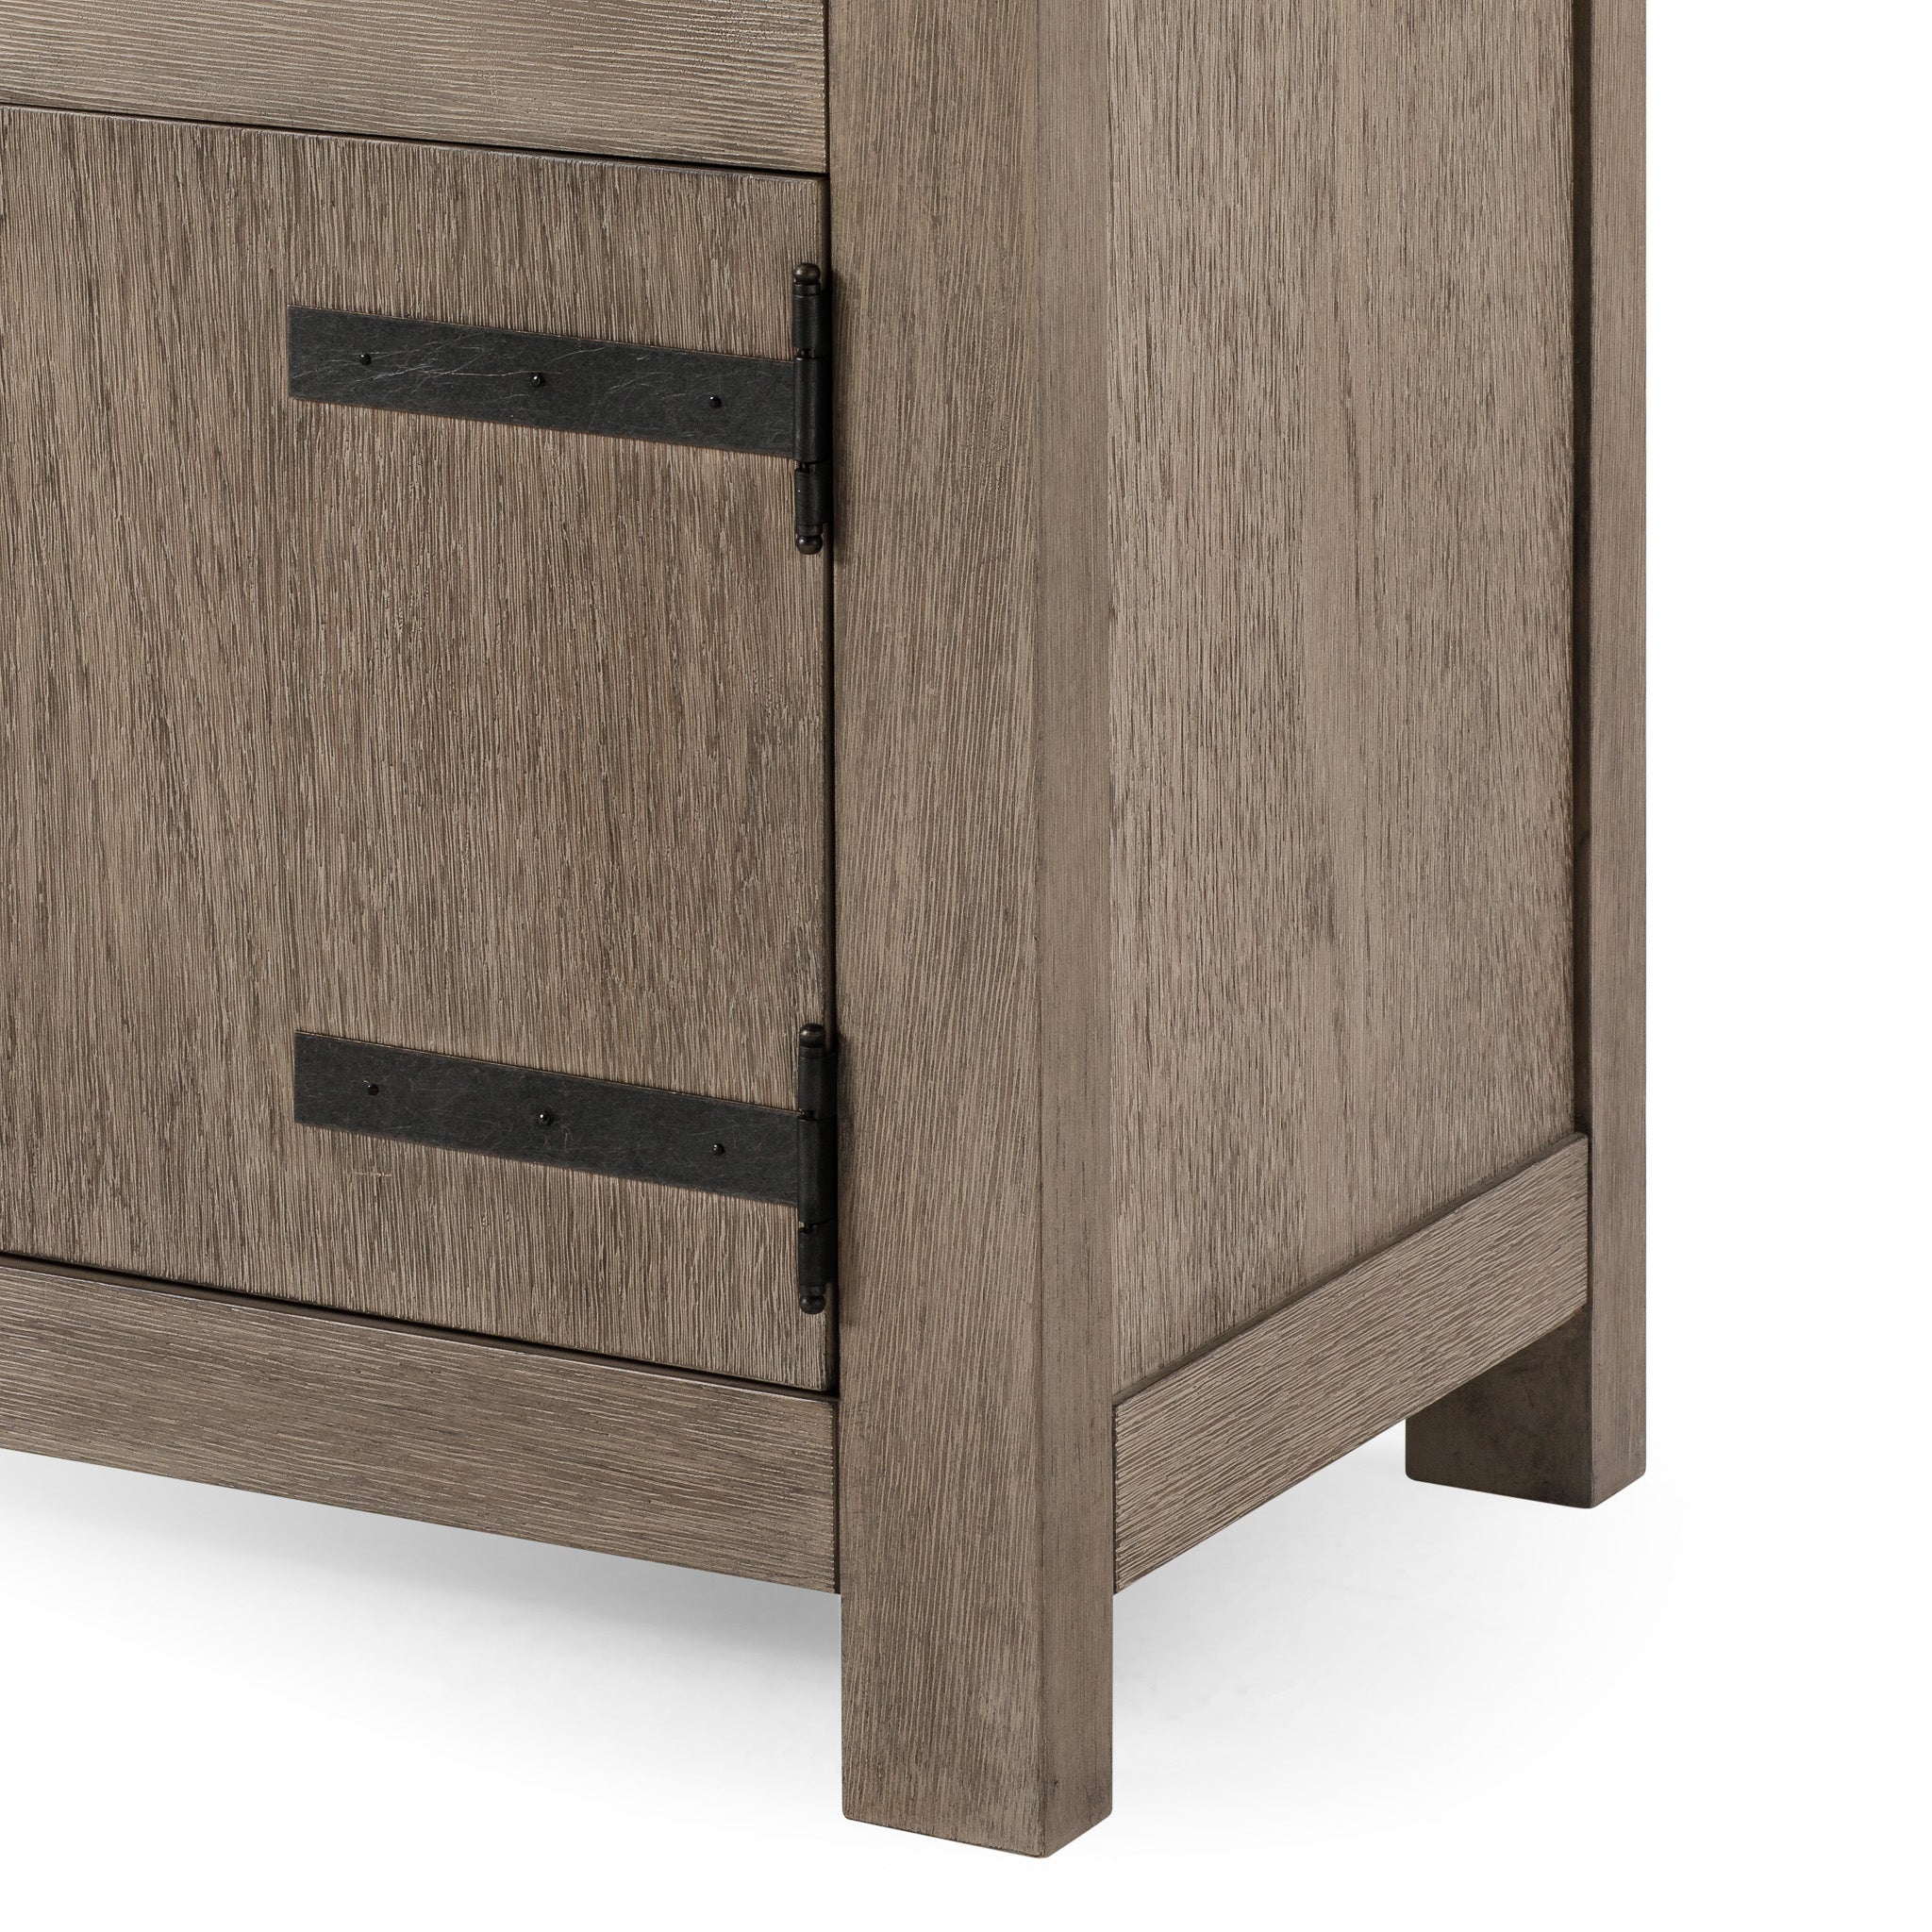 Luca Organic Wooden Media Unit in Weathered Grey Finish in Media Units by Maven Lane